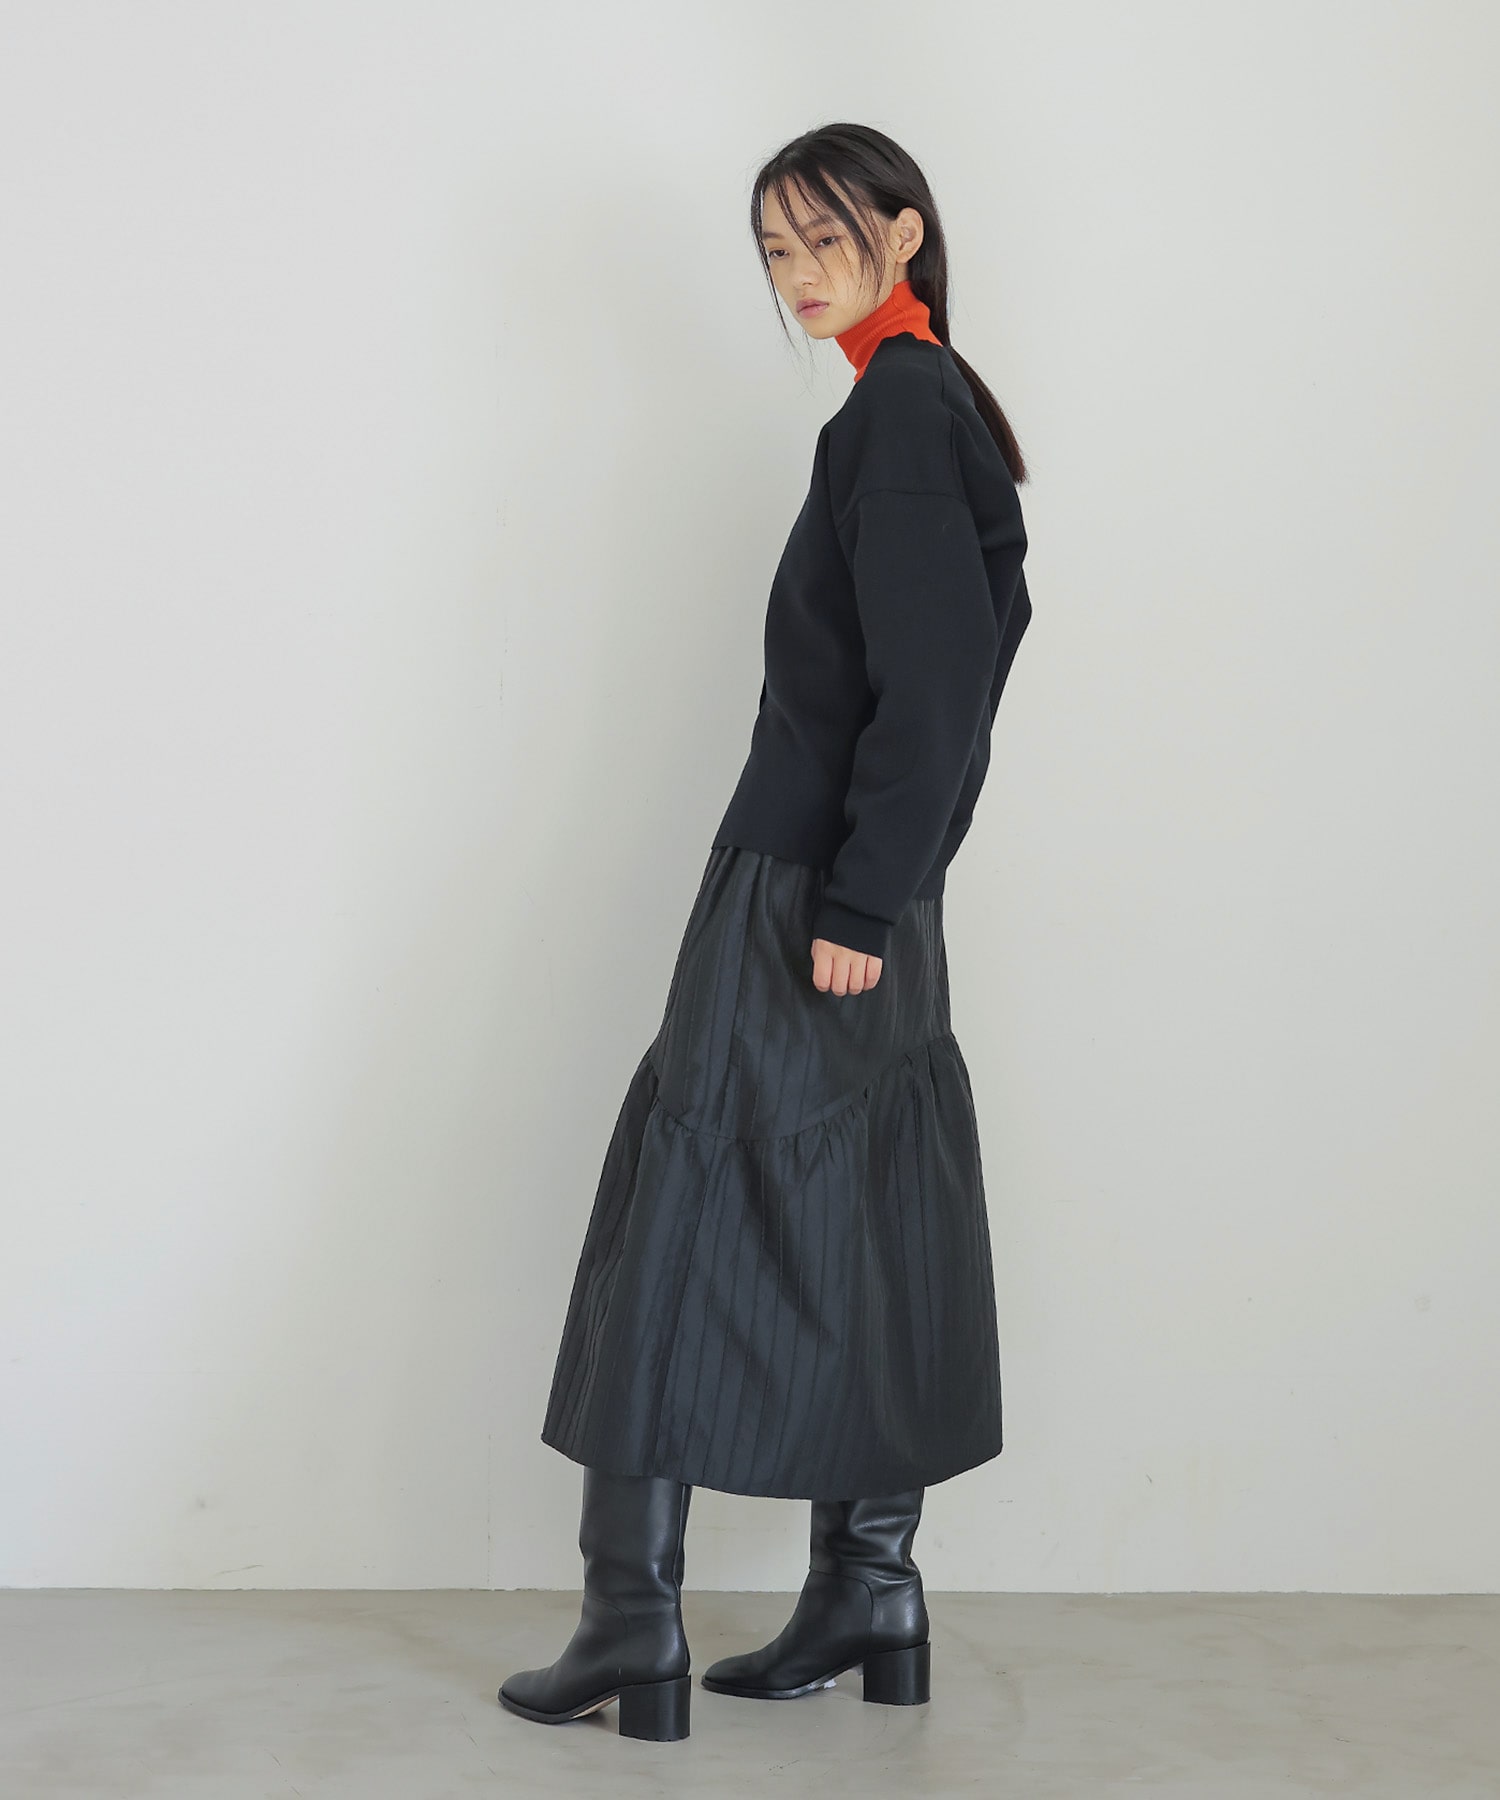 CADDITION＞stripe jacquard gather skirt | AND ON JIONE STORE